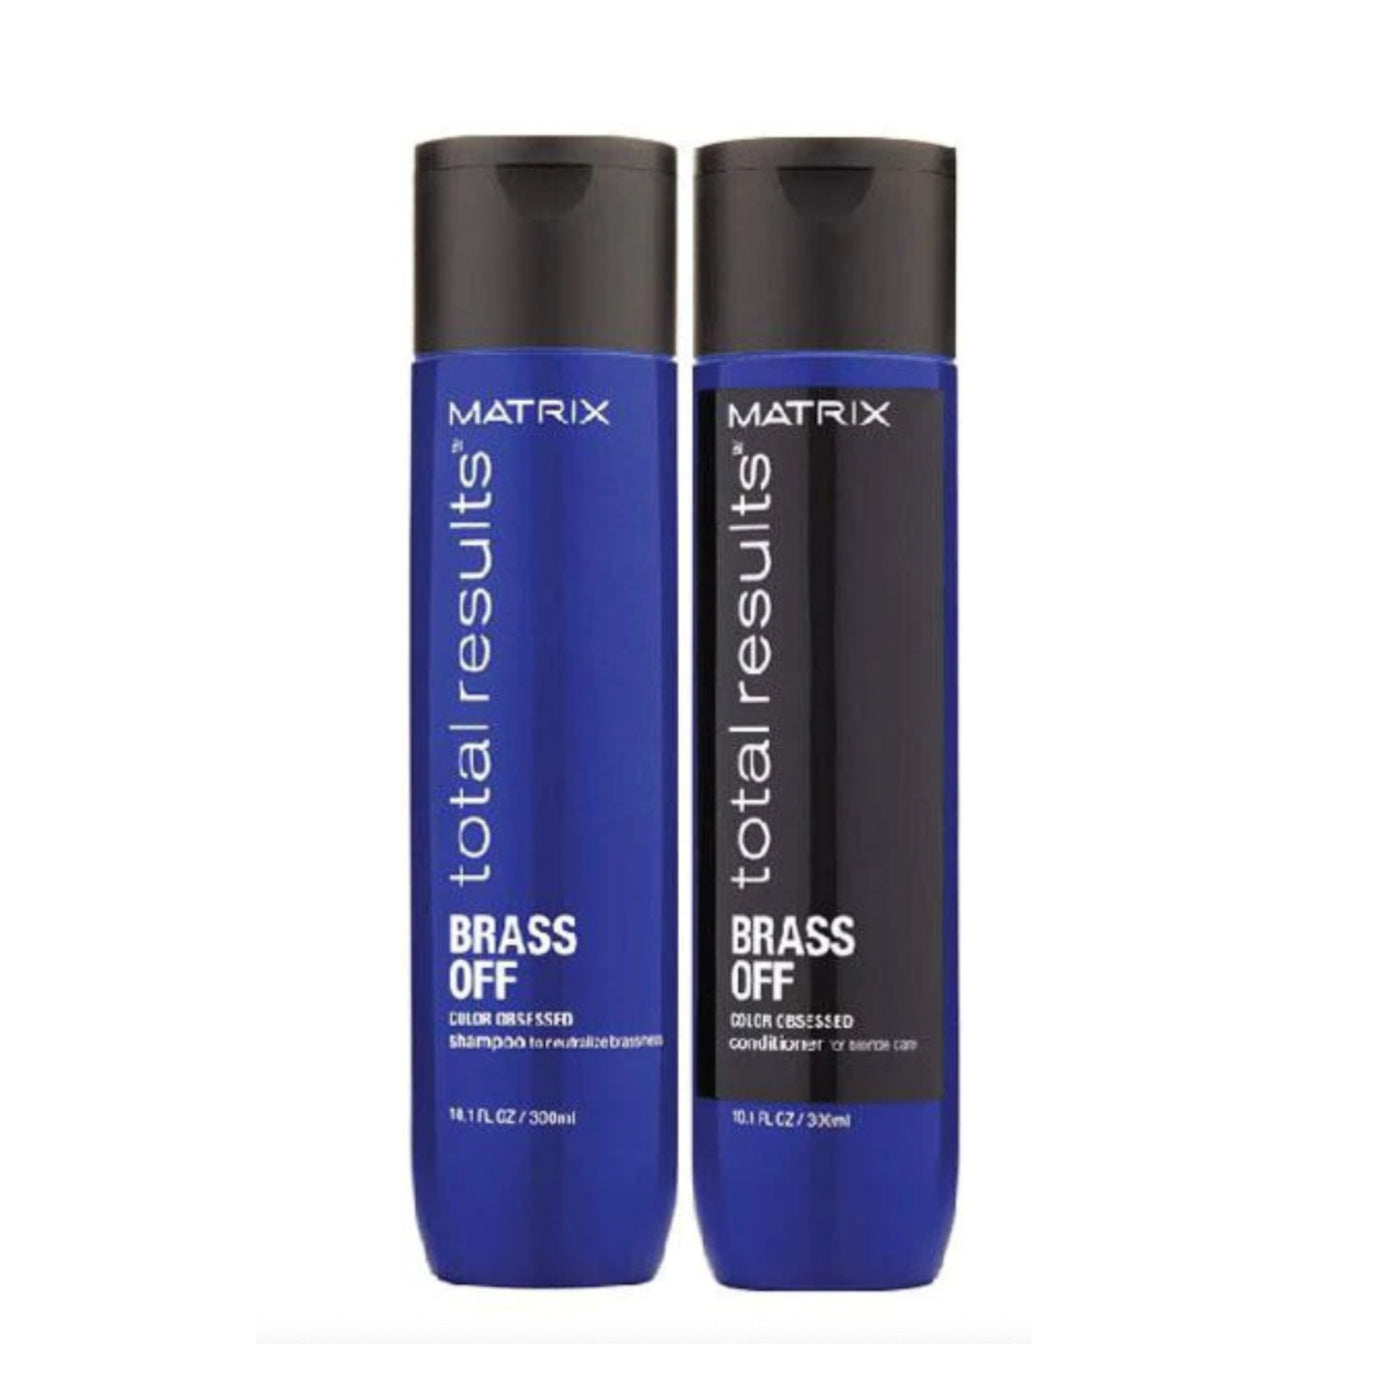 Matrix Brass Off For For Lightened Brunettes Shampoo & Conditioner Duo Set